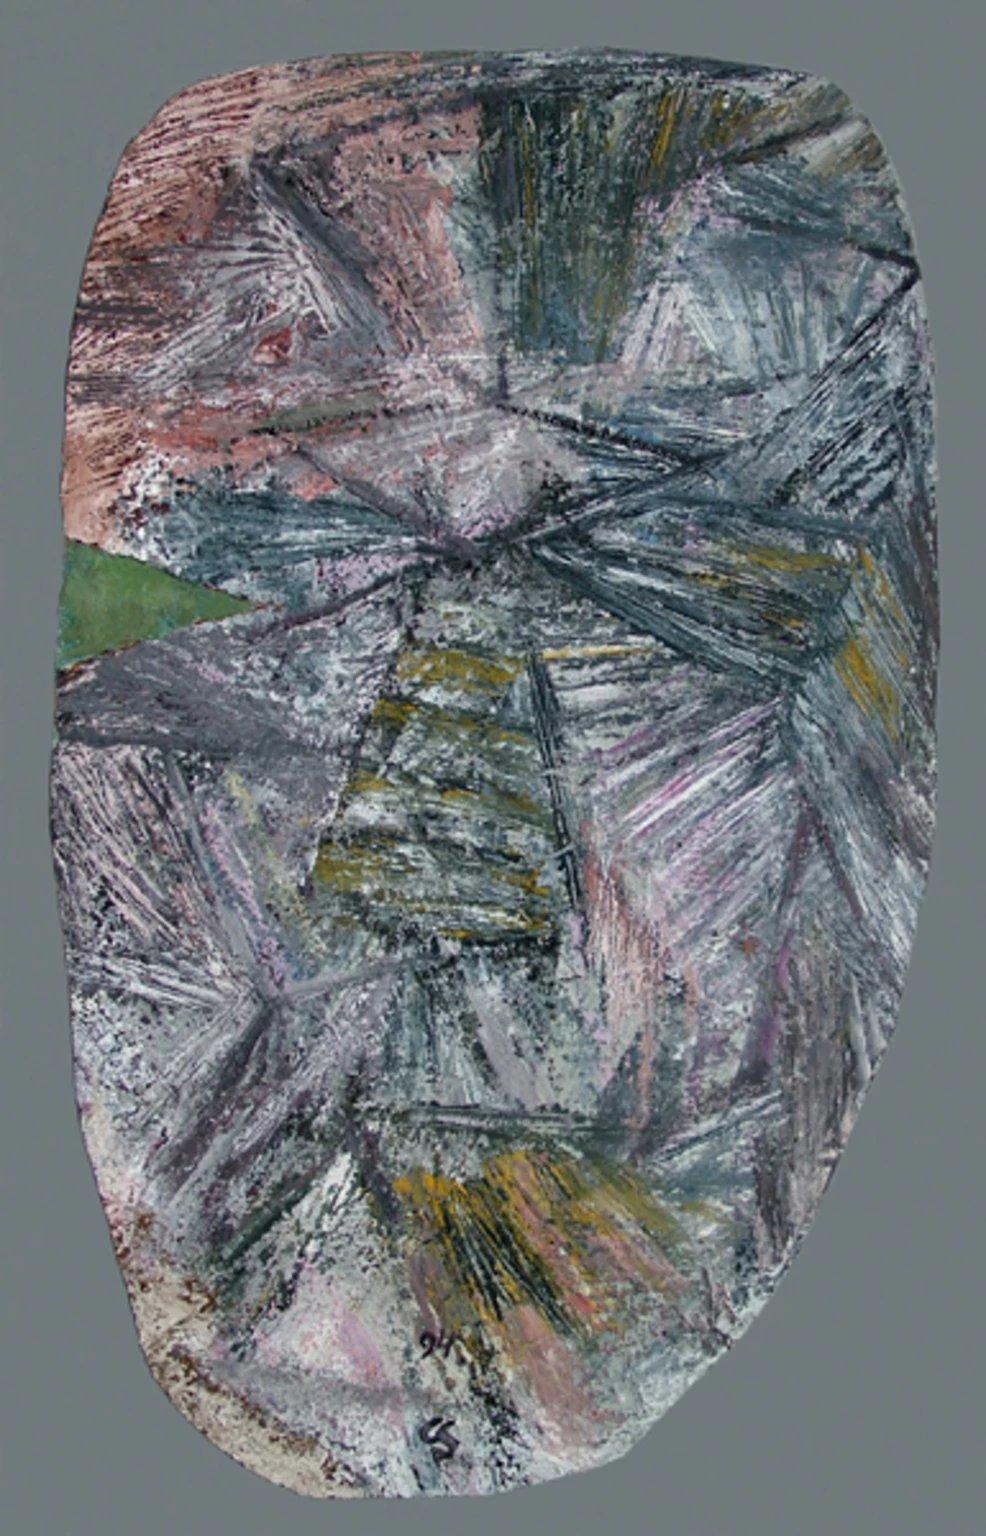 Melting with the snow(mask), 1994 - egg tempera, oil, , 130 x 84 cm